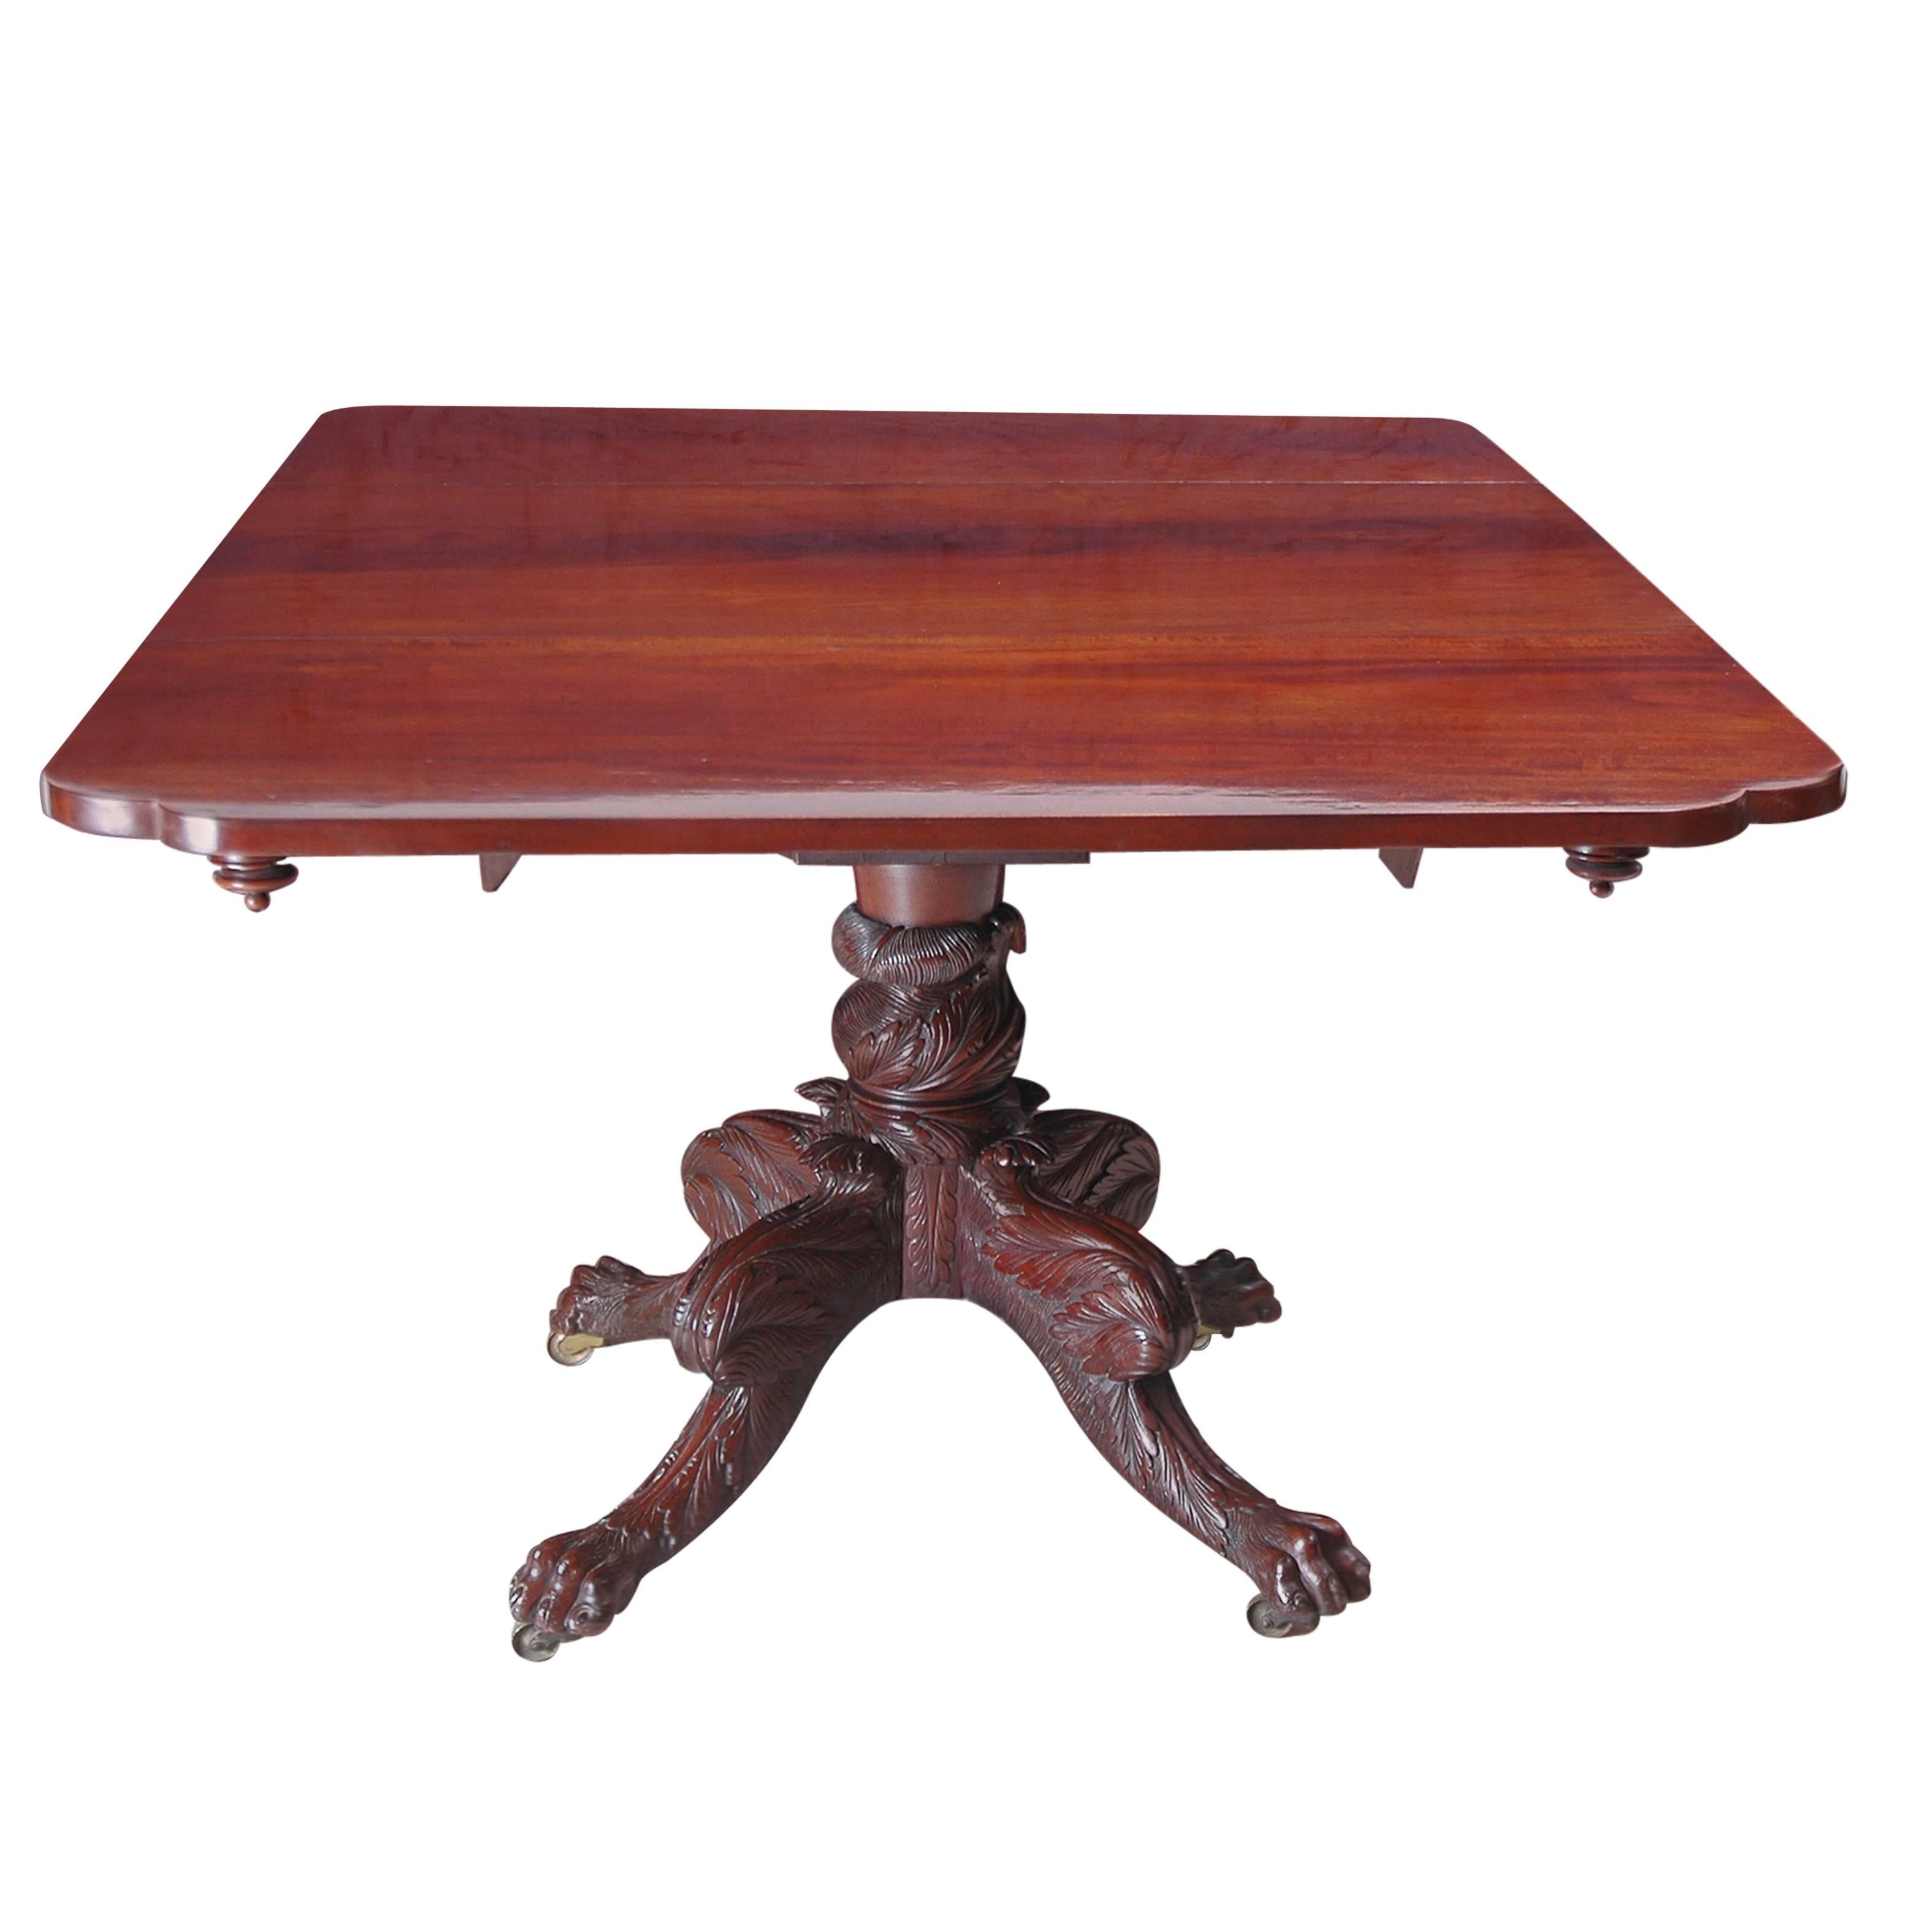 A Federal breakfast table in mahogany with a rectangular top and drop-leaves whose corners end in cyma curves, with inverted turned wooden finials. The rectangular top rests on a beautifully carved pedestal base consisting of a foliate-carved